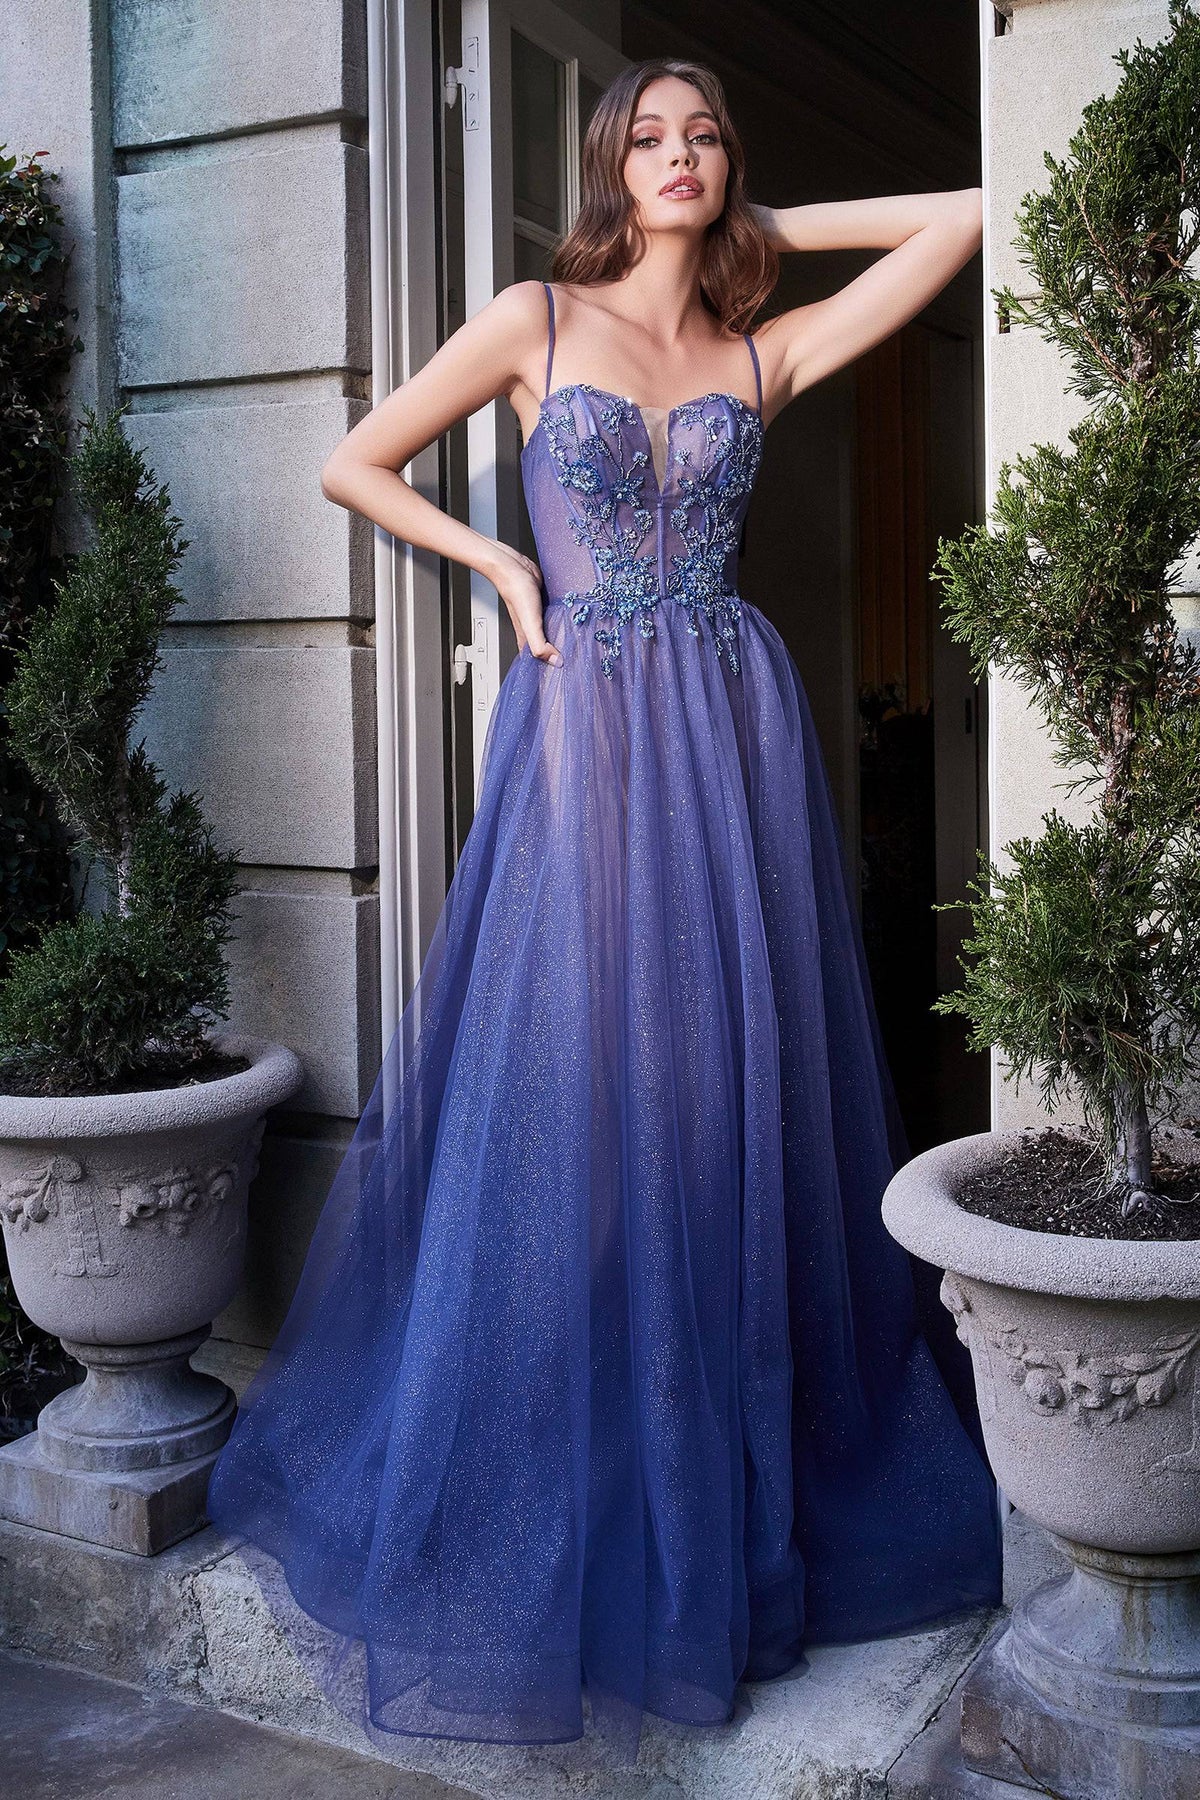 Royal Blue Strapless Chiffon Homecoming Dress with Lace Corset Top and –  DressesTailor